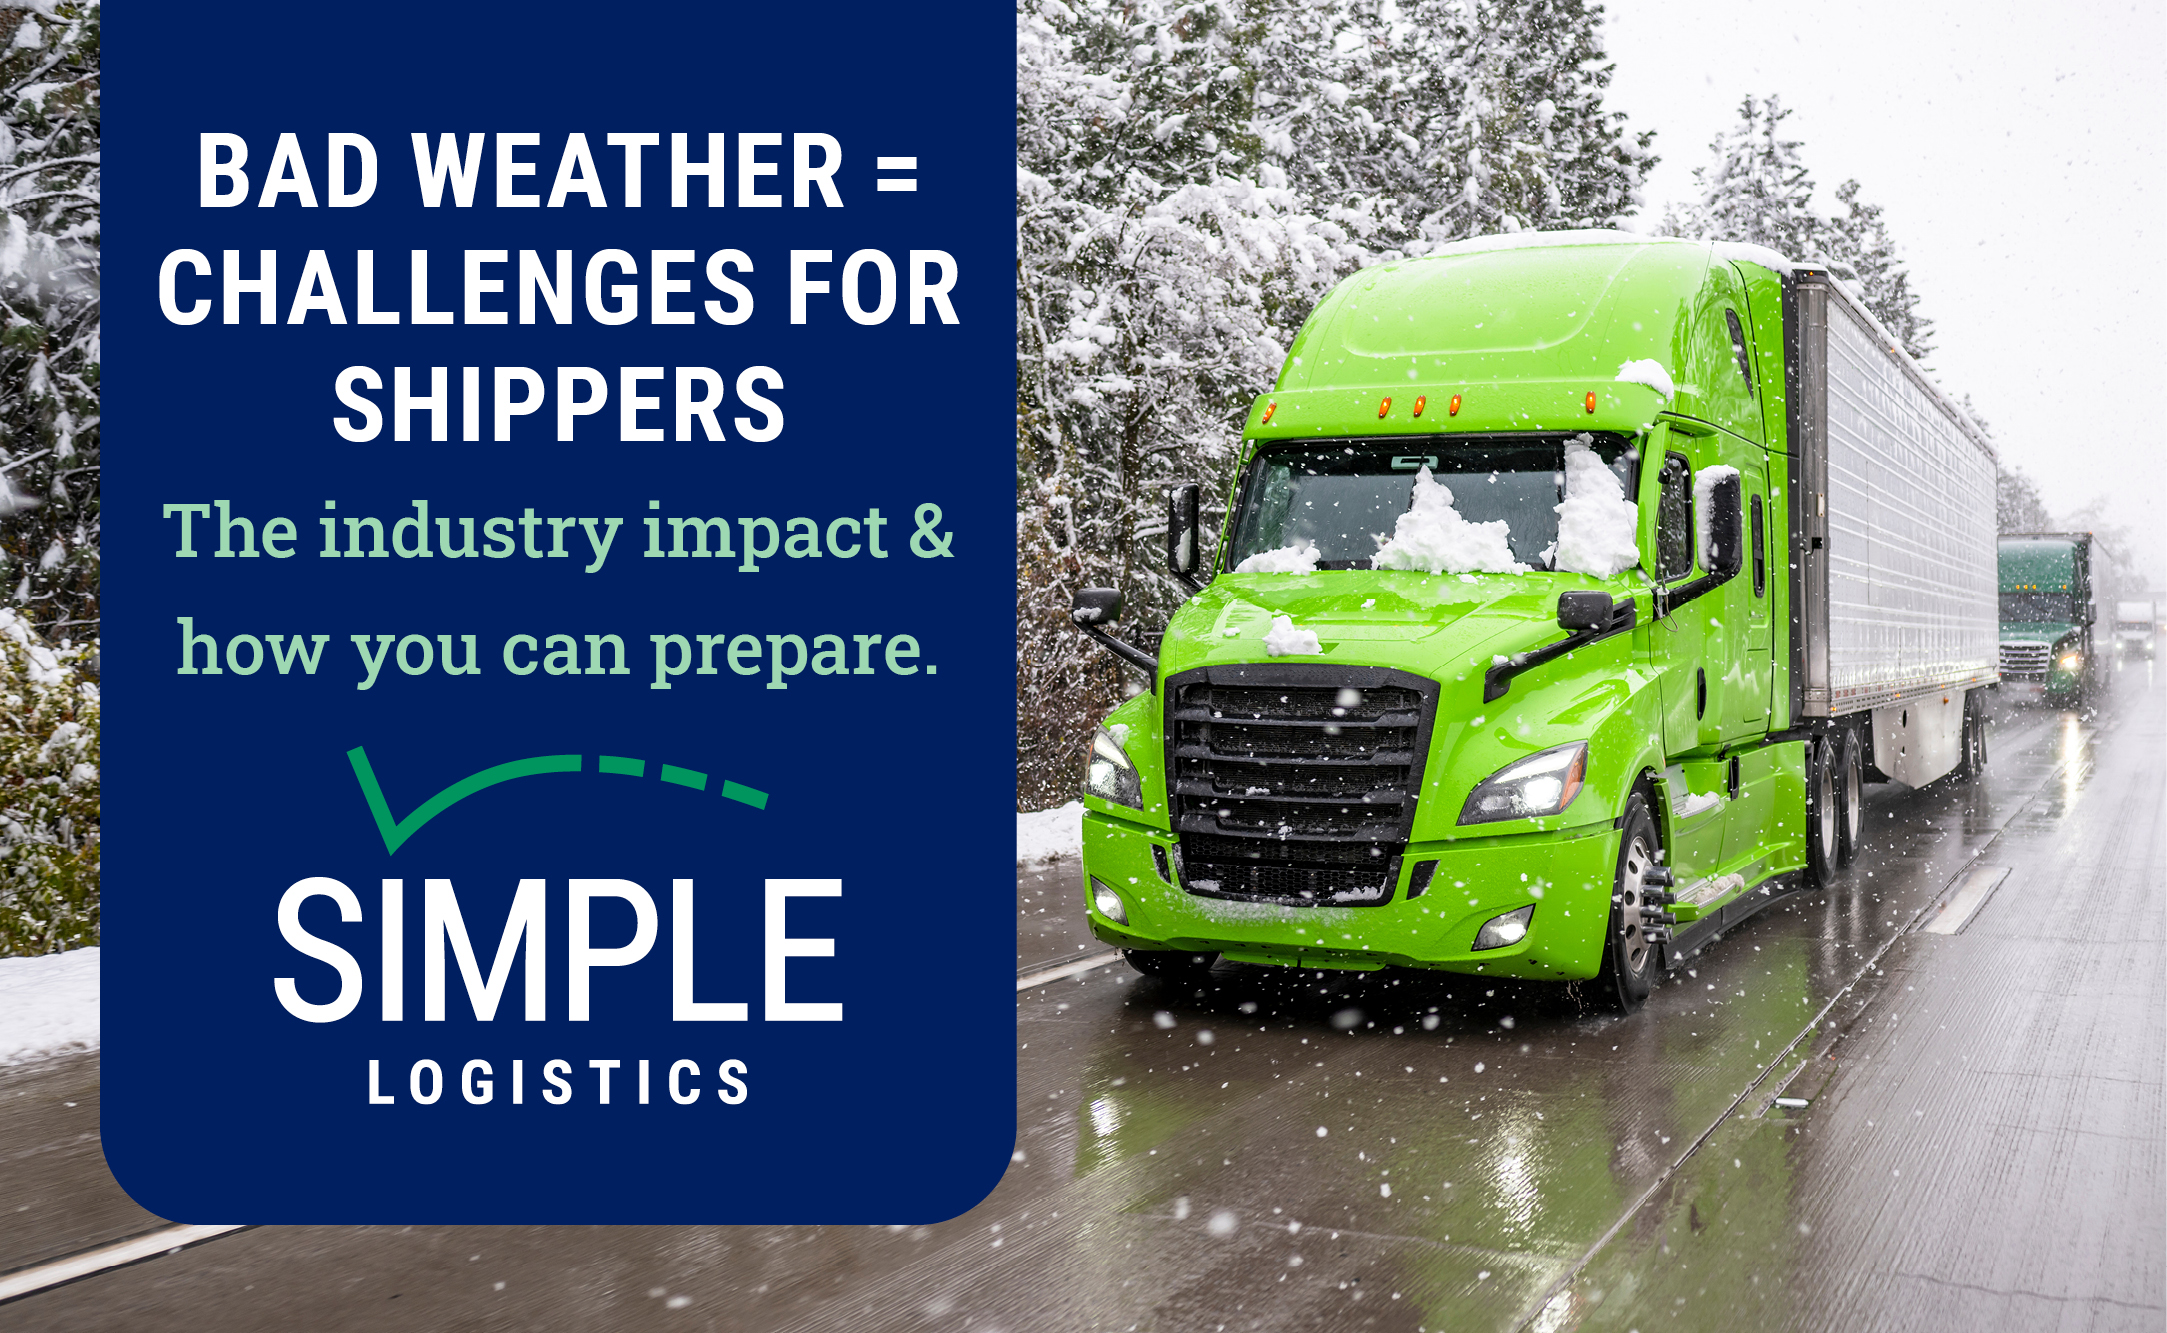 Green semi-truck in bad weather next to title of article: Bad Weather Presents Challenges for Shippers.